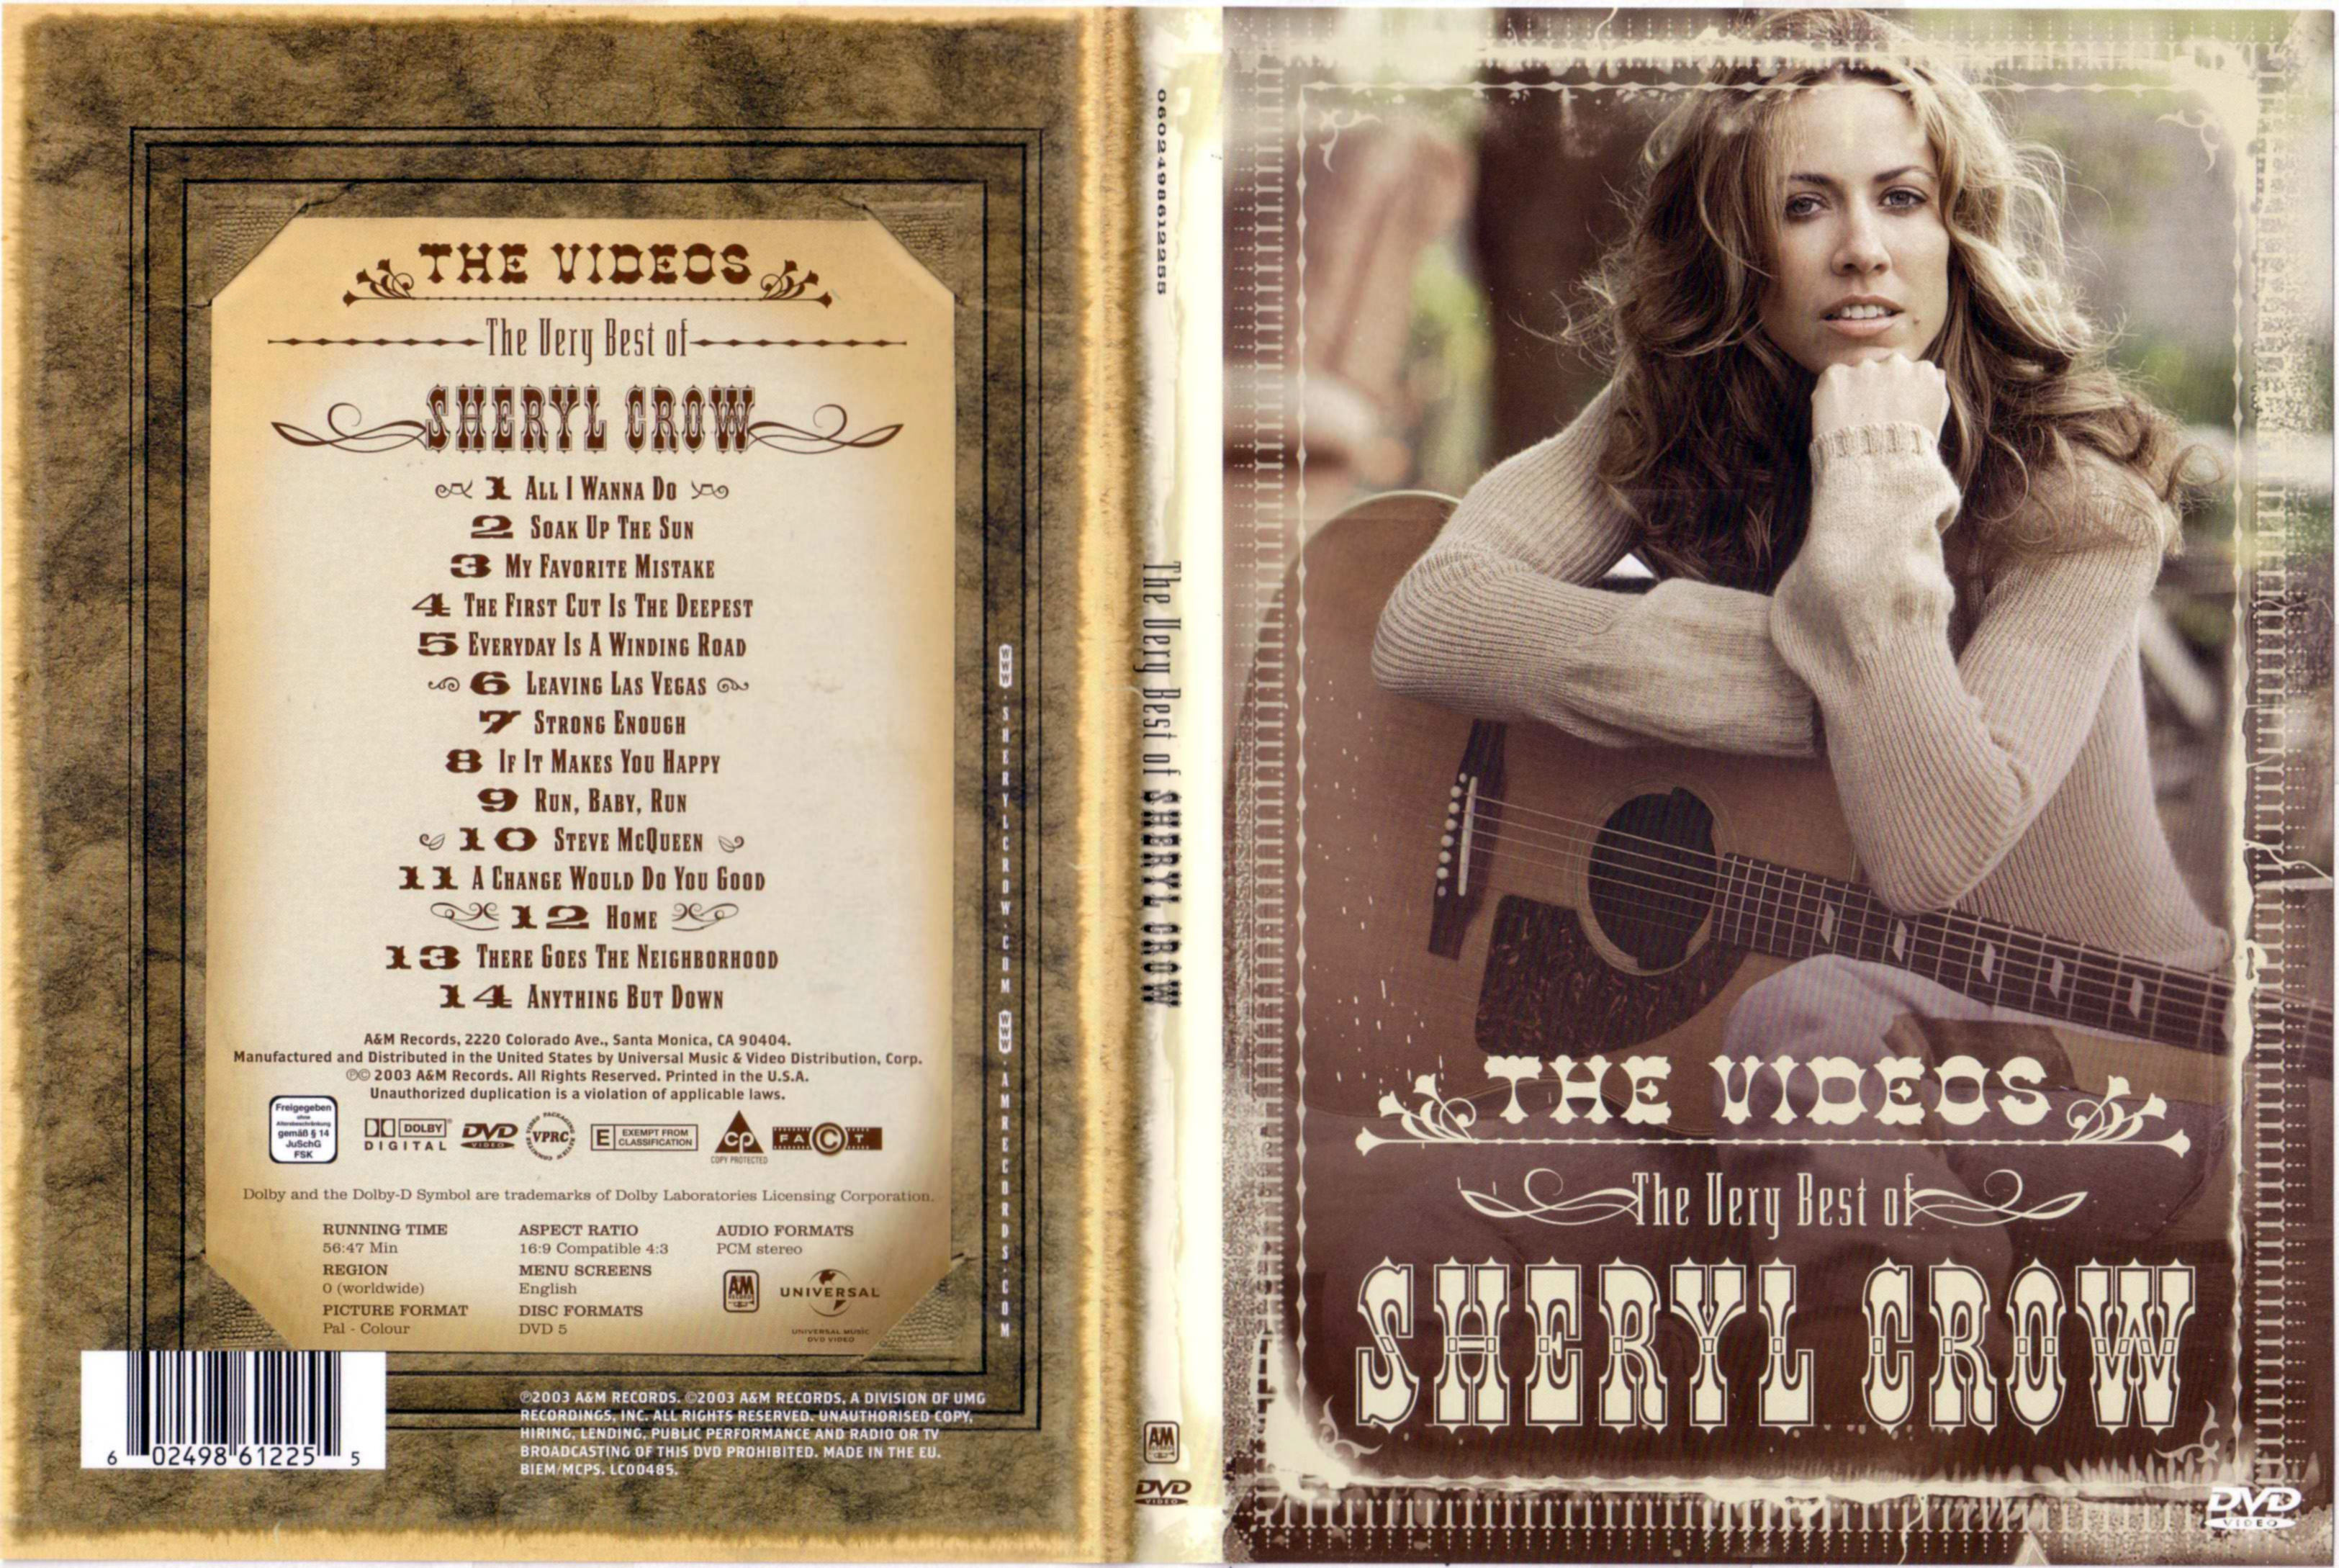 Jaquette DVD Sheryl Crow The very best of